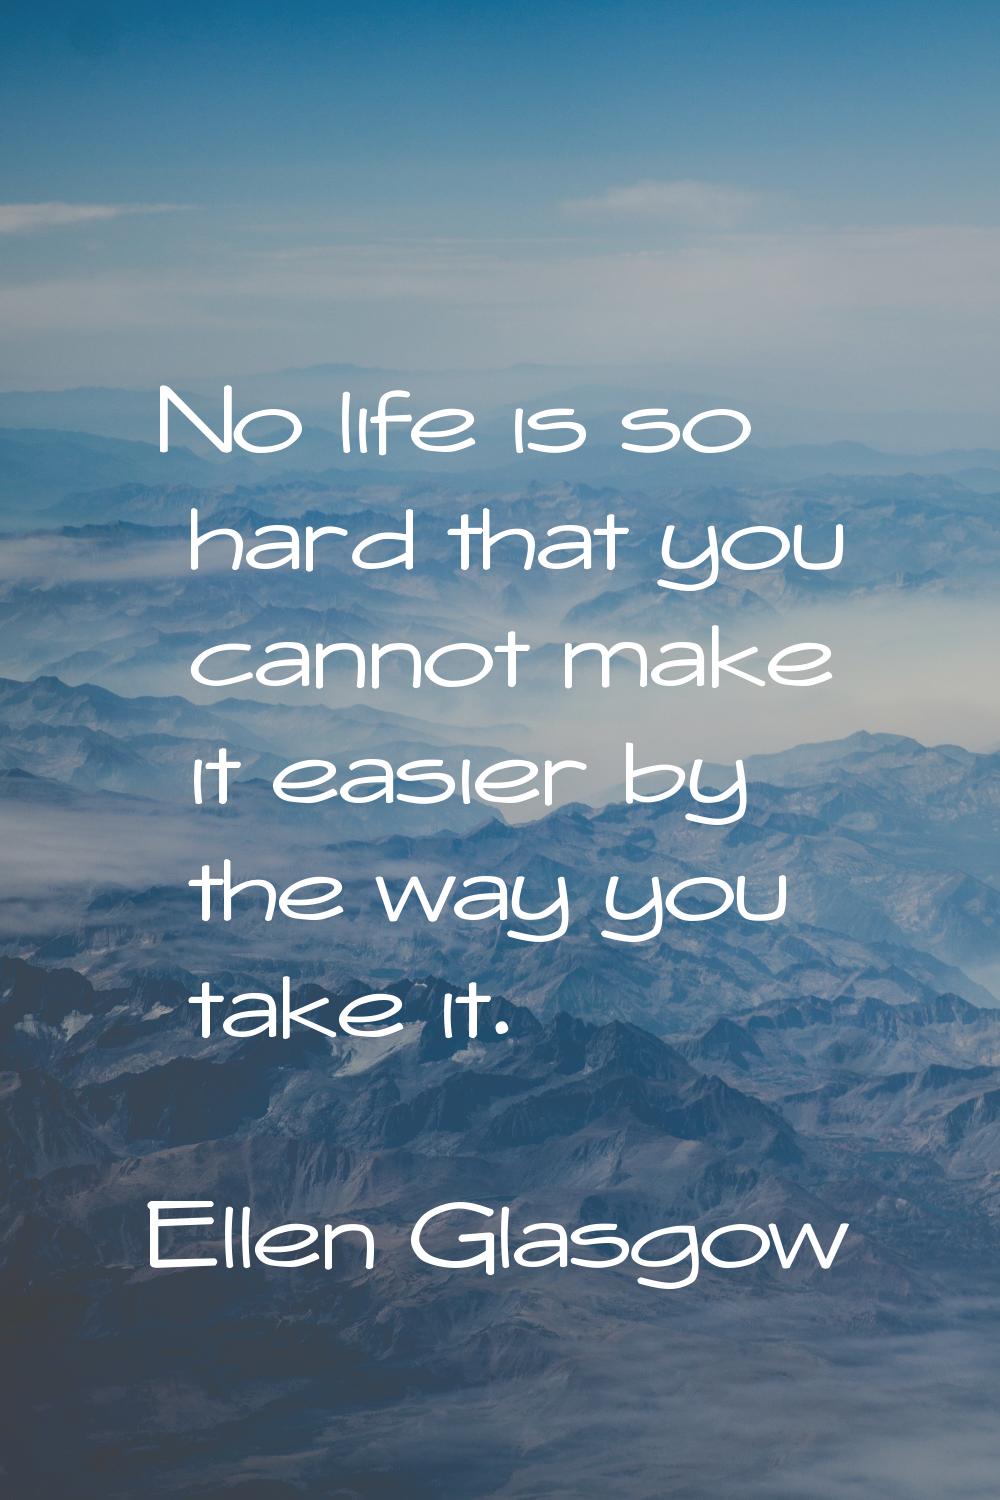 No life is so hard that you cannot make it easier by the way you take it.